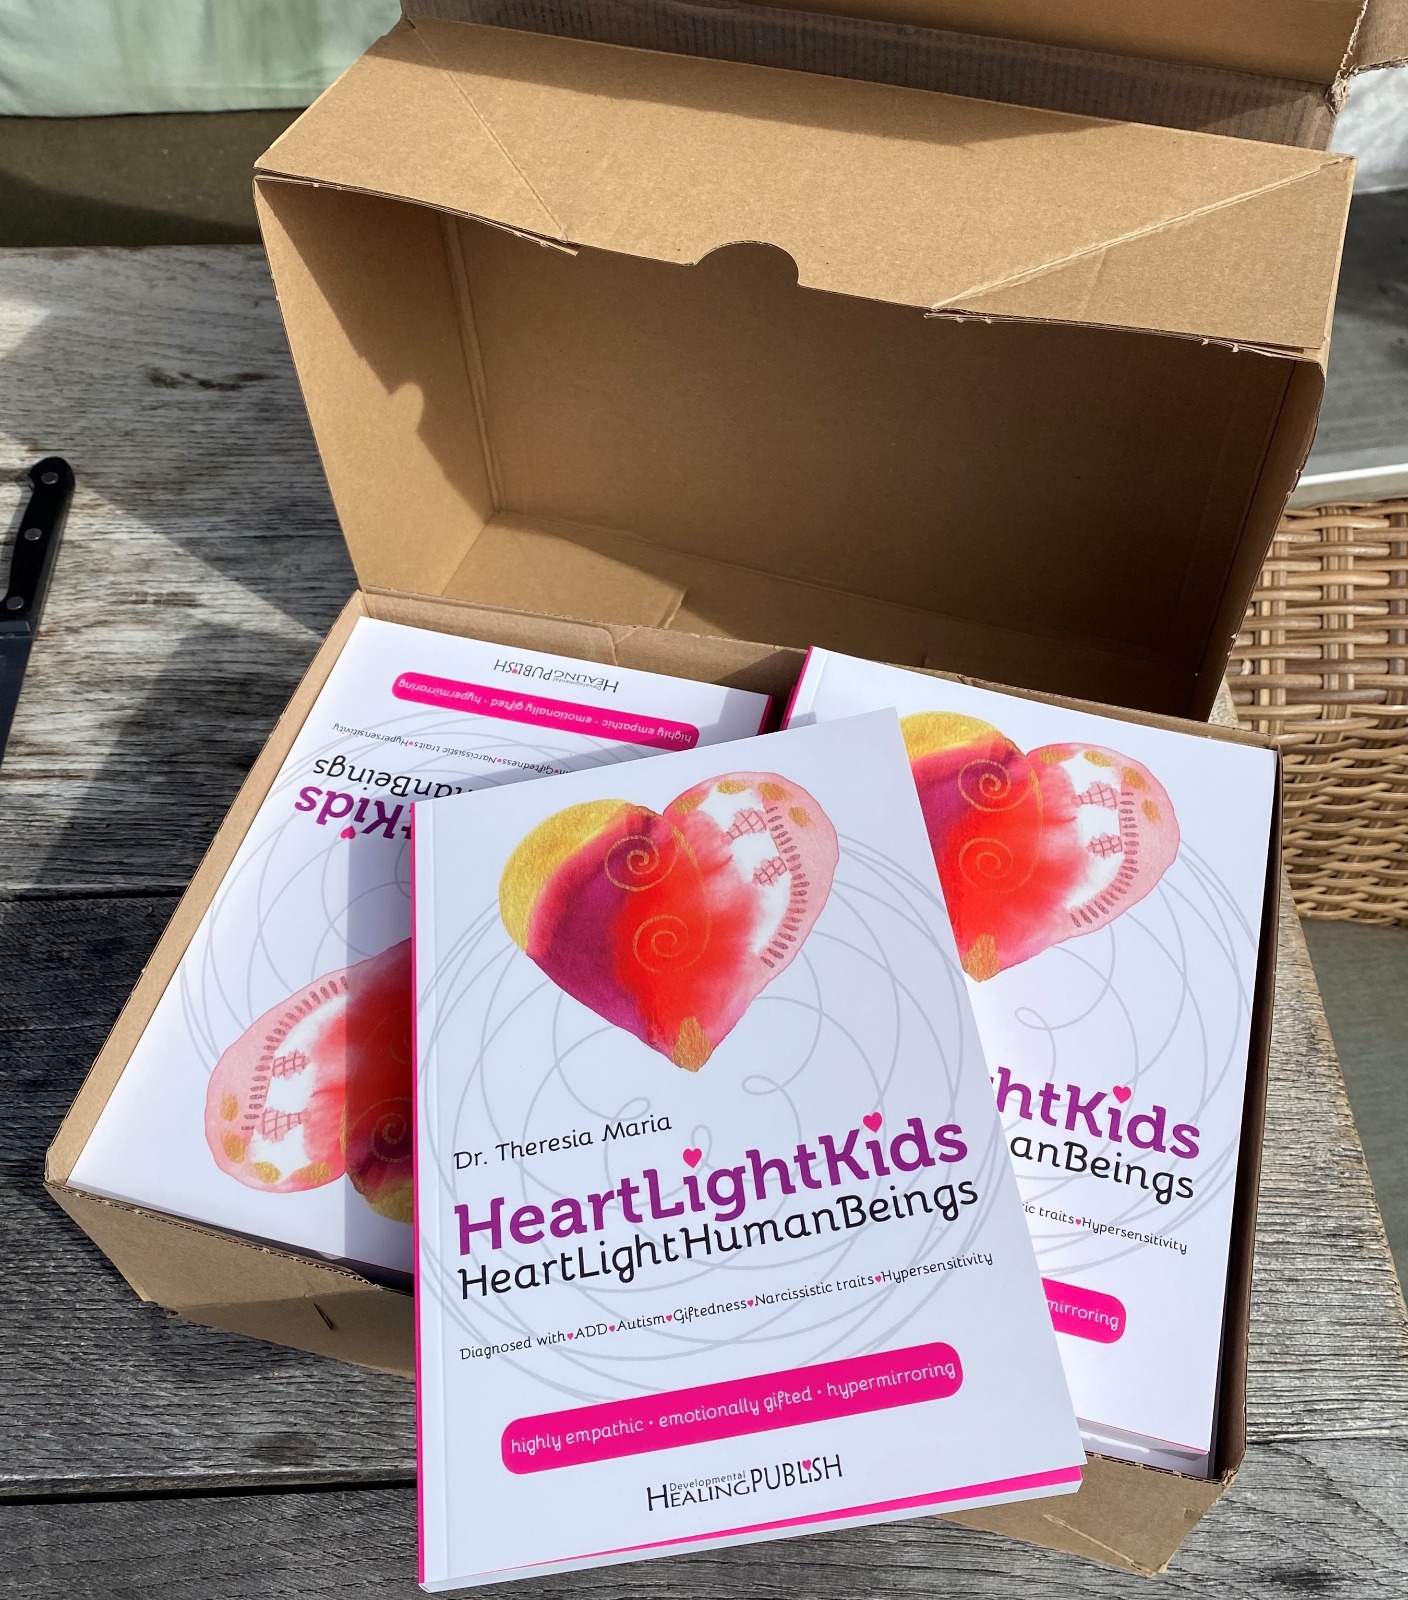 the NEW book "HeartLightKids" has arrived